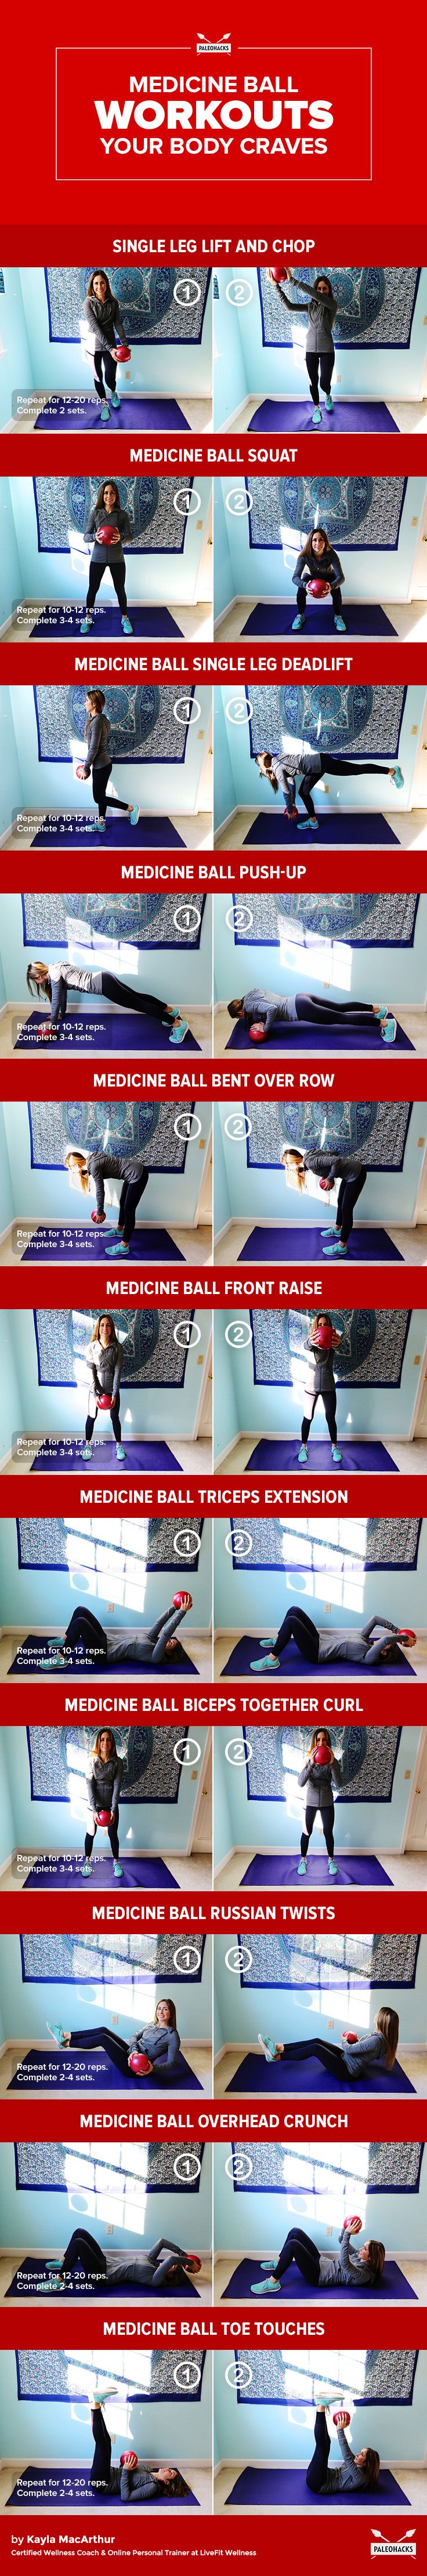 Medicine_Ball_Workouts_Your_Body_Craves_infographic